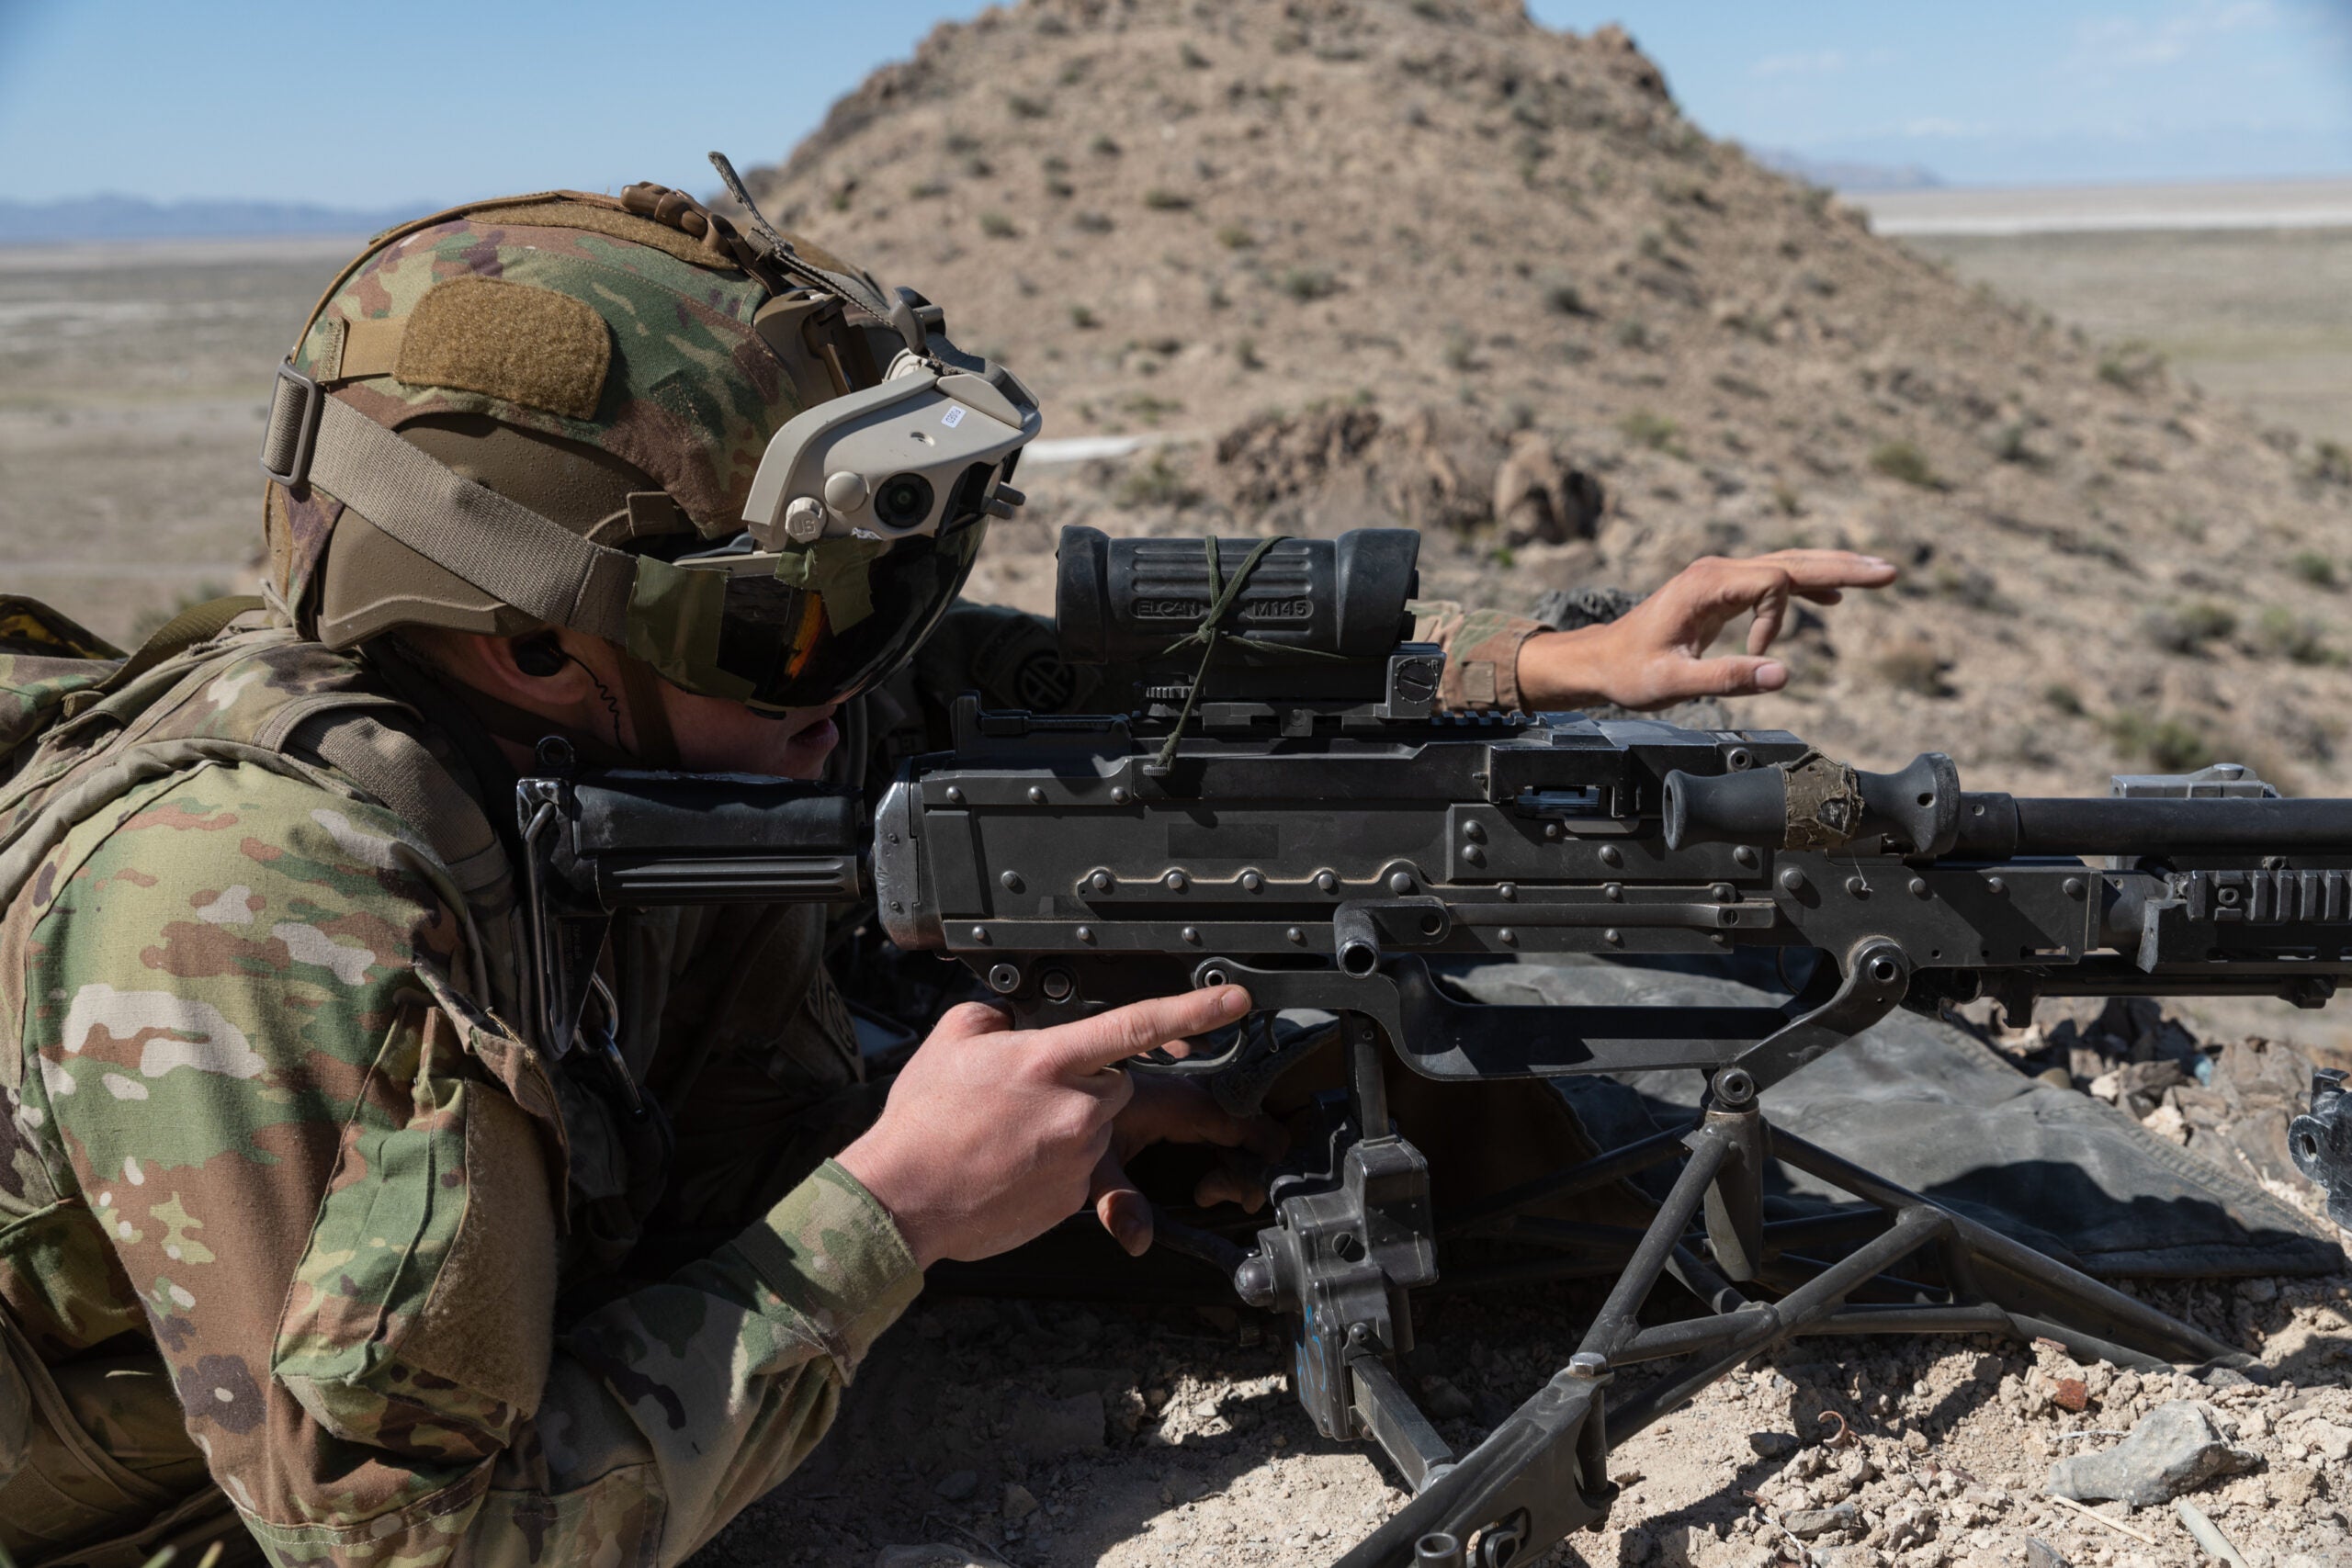 Paratroopers from the 82nd Airborne Division, 1st Battalion 508th Parachute Infantry Regiment, test the Integrated Visual Augmentation System (IVAS) during EDGE 21 at Dugway Proving Ground, Utah, May 2021.